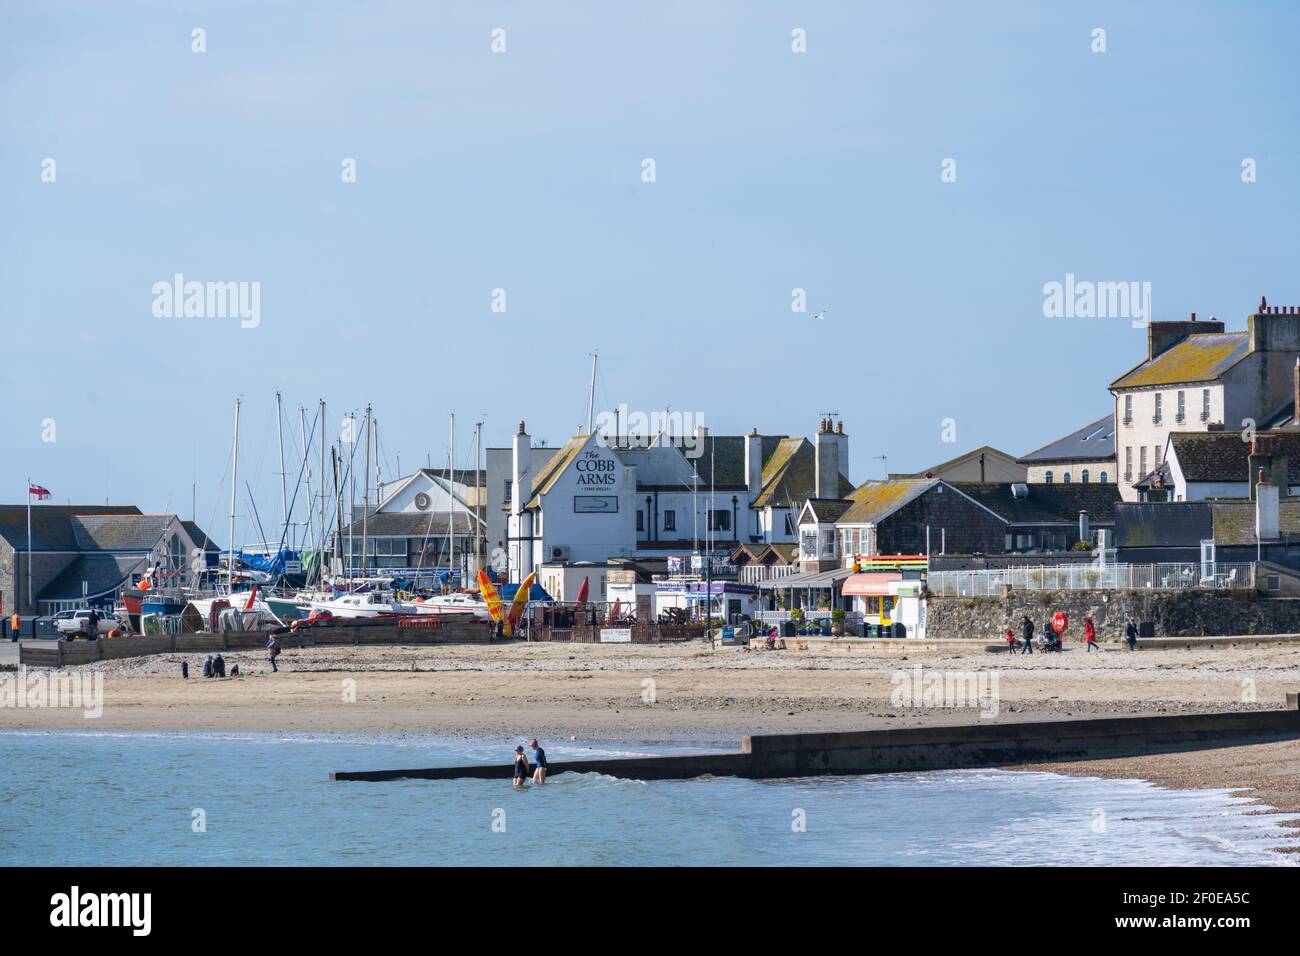 Lyme Regis, Dorset, UK. 7th March 2021. UK Weather: The picturesque seaside town of Lyme Regis on a glorious spring day during the third national lockdown. The beach would normally be much busier on a sunny Sunday in early spring. Credit: Celia McMahon/Alamy Live News. Stock Photo